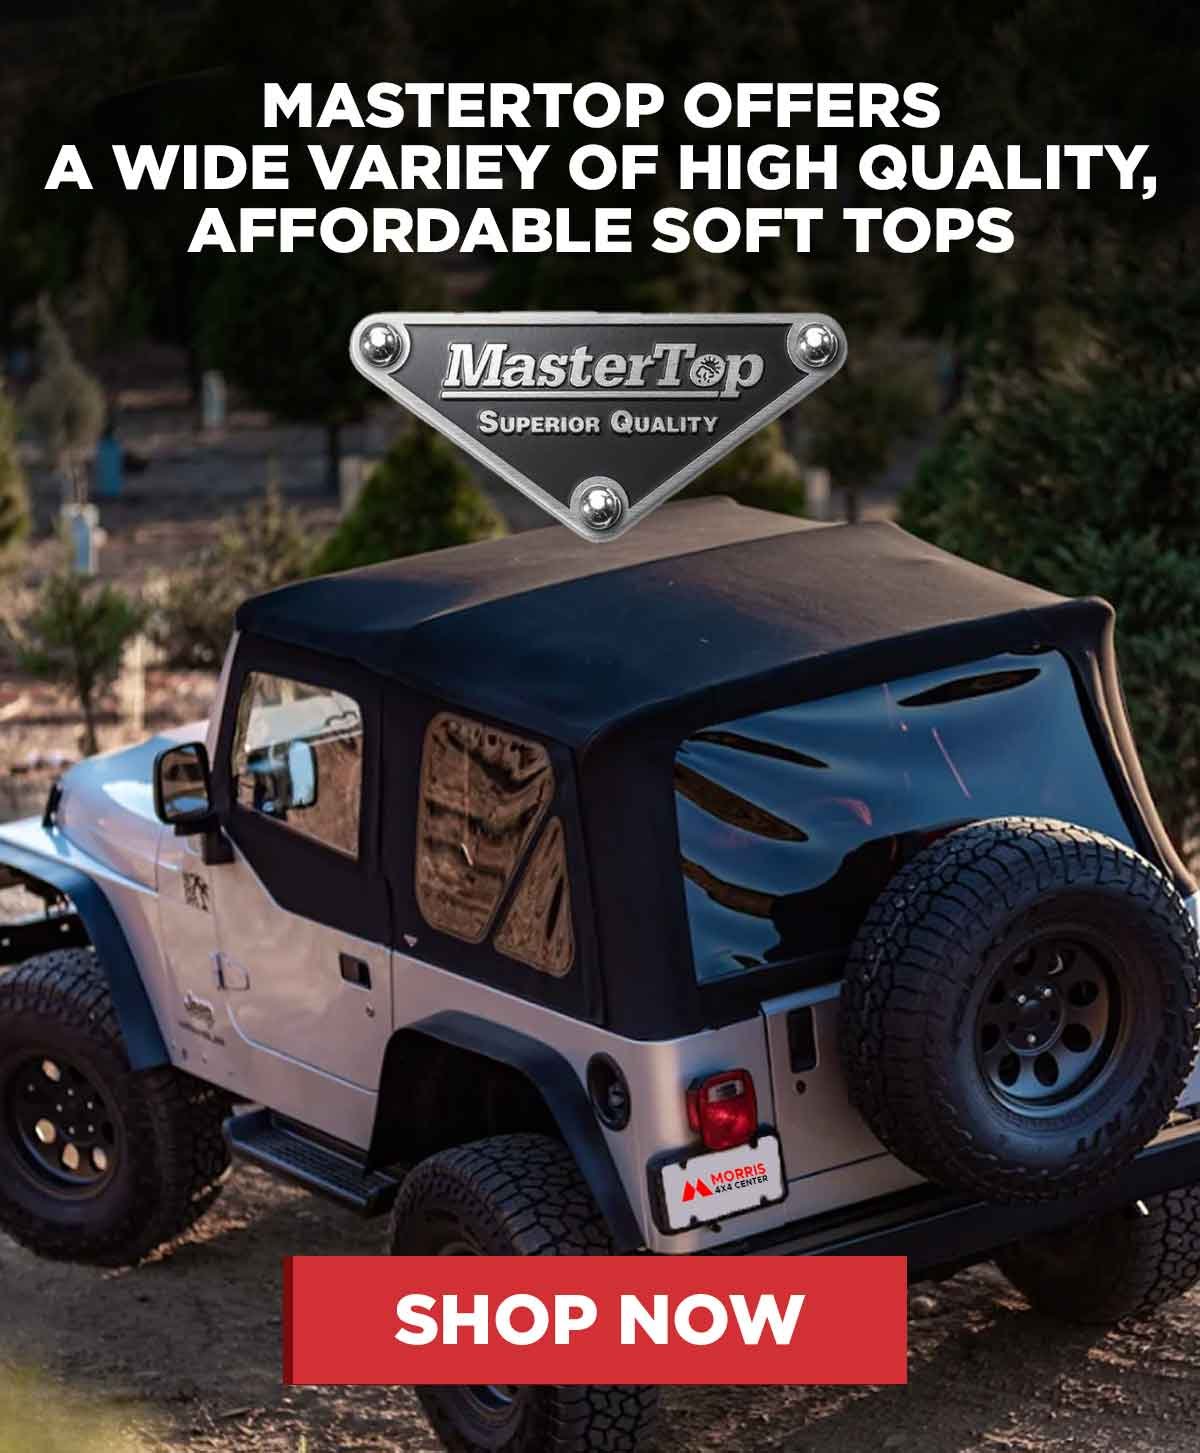 MasterTop Offers A Wide Variey Of High Quality, Affordable Soft Tops